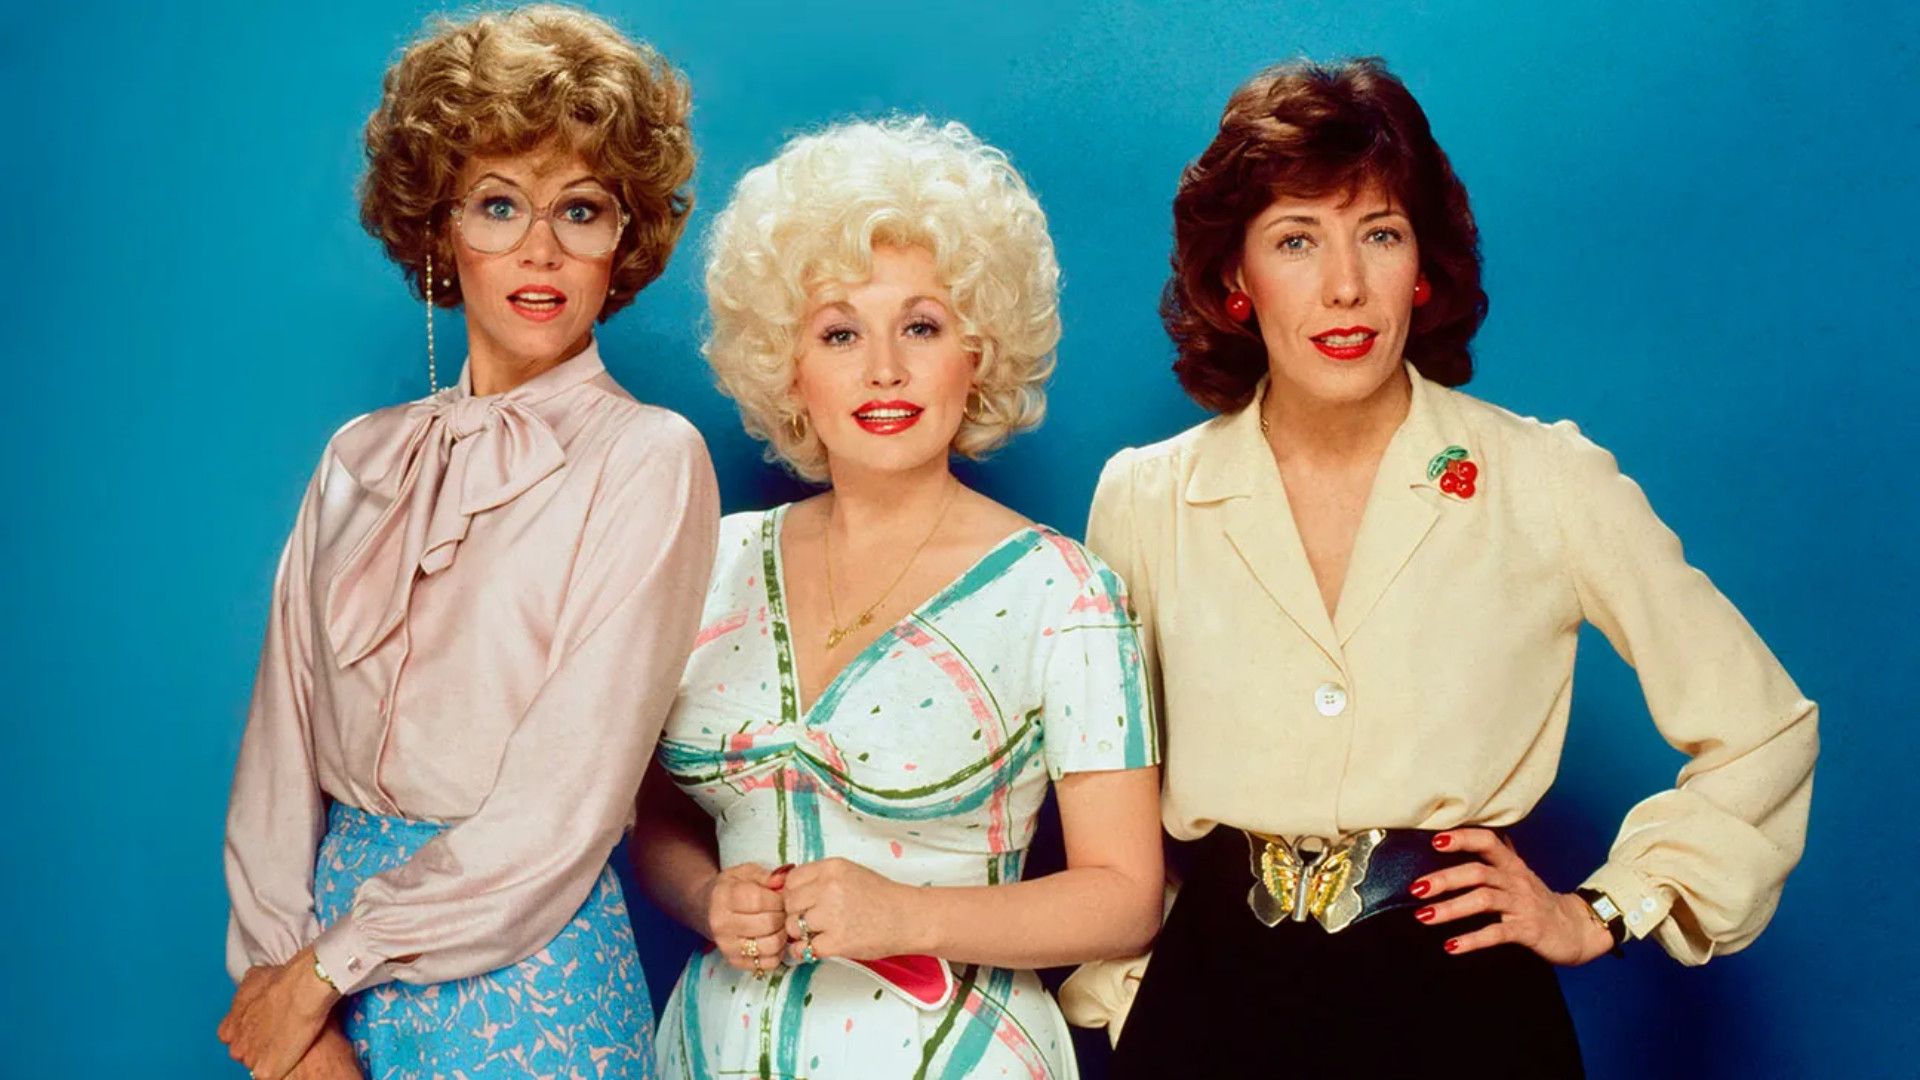 Jane Fonda, Dolly Parton, and Lily Tomlin pose in an image for 9 to 5